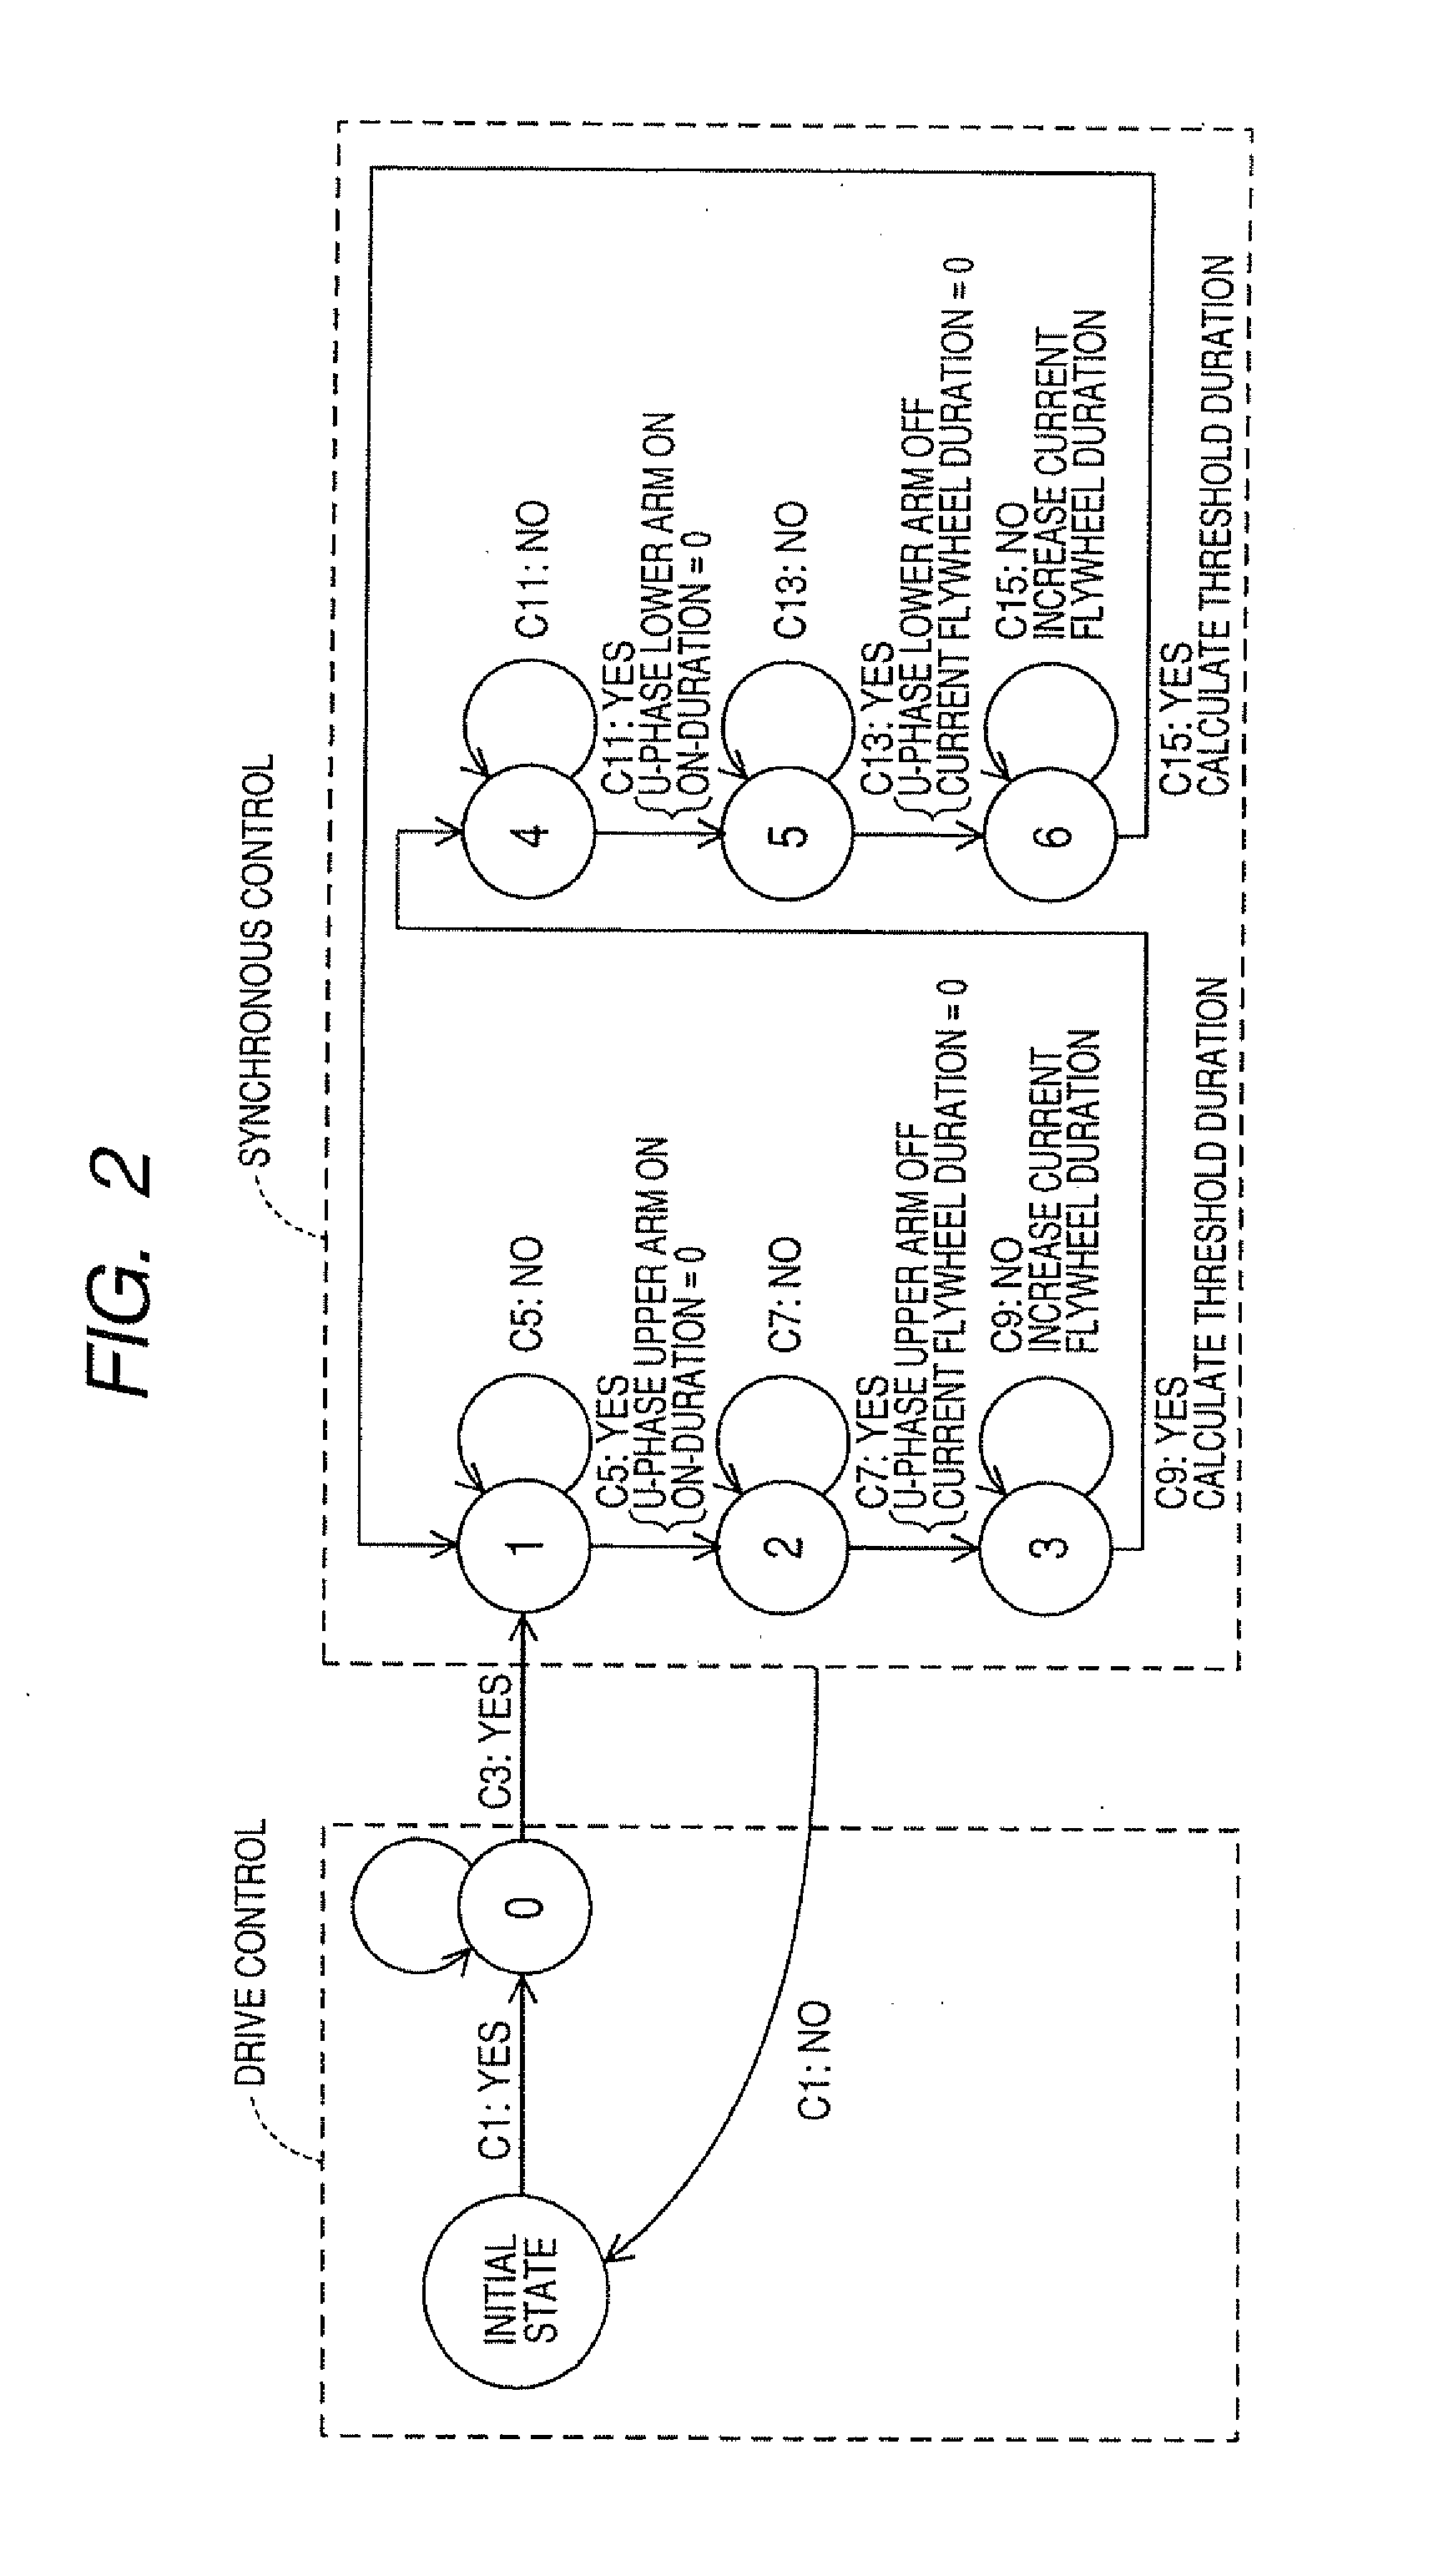 Power converter for electric rotating machine